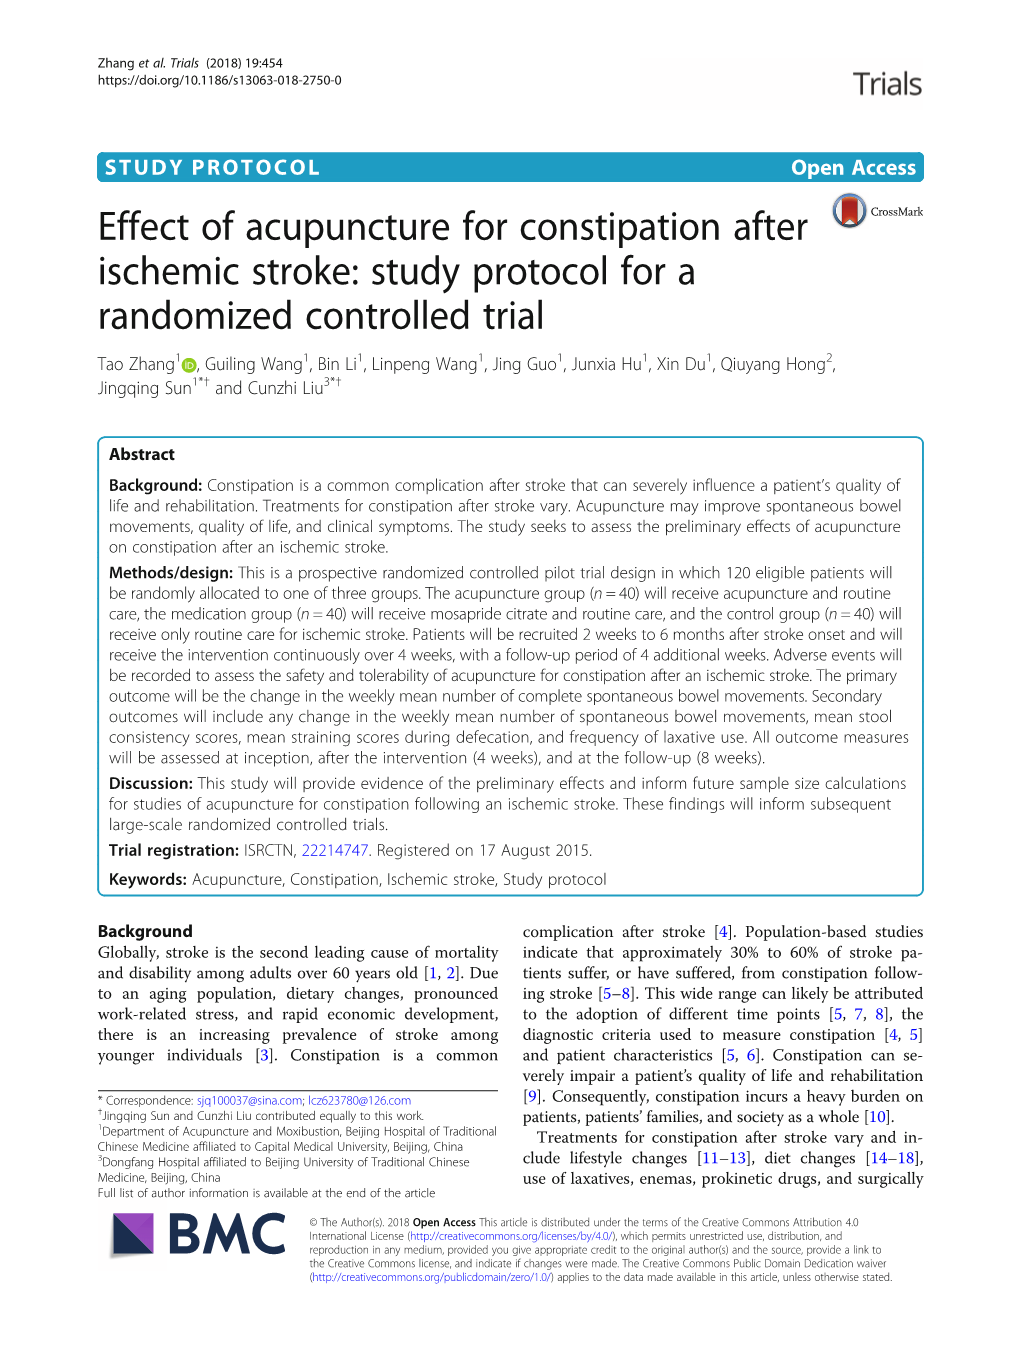 Effect of Acupuncture for Constipation After Ischemic Stroke: Study Protocol